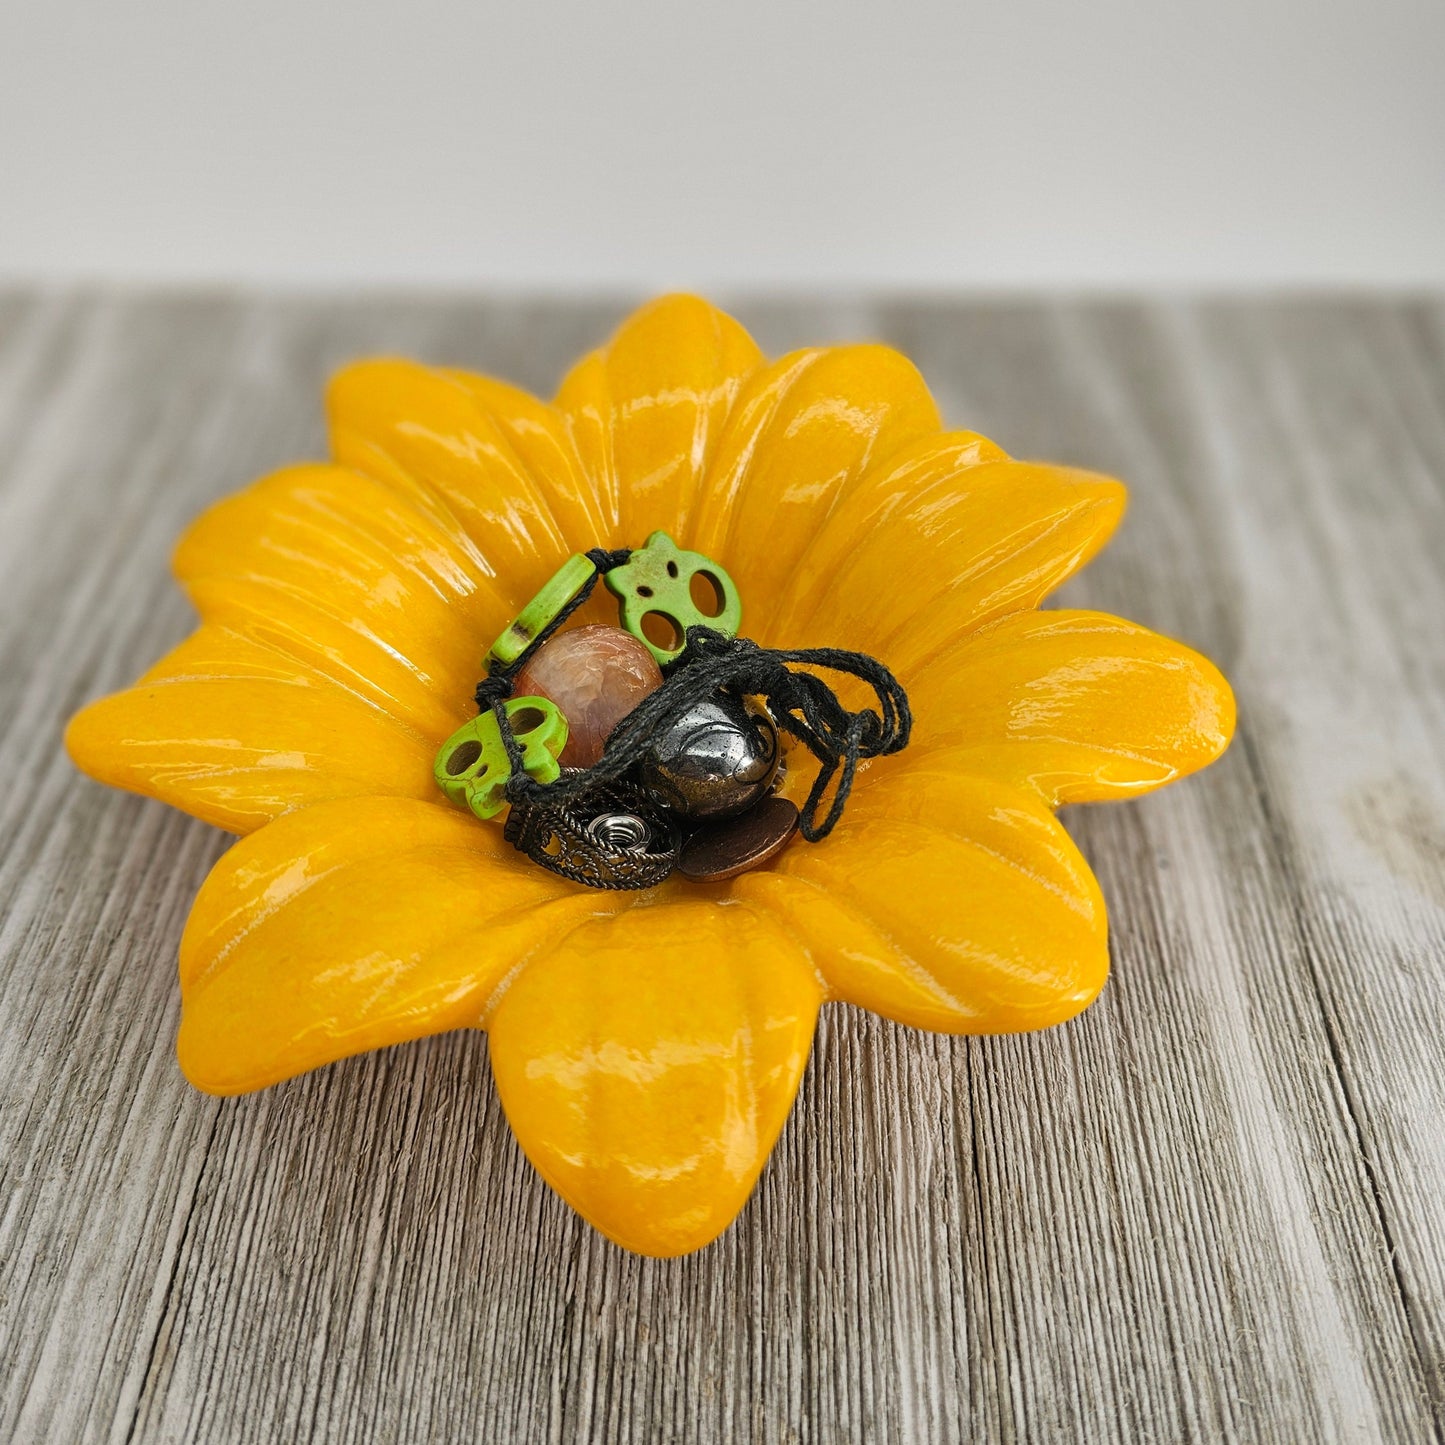 Handmade Fused Glass Daisy Bowl - Perfect Gift for Flower Lovers